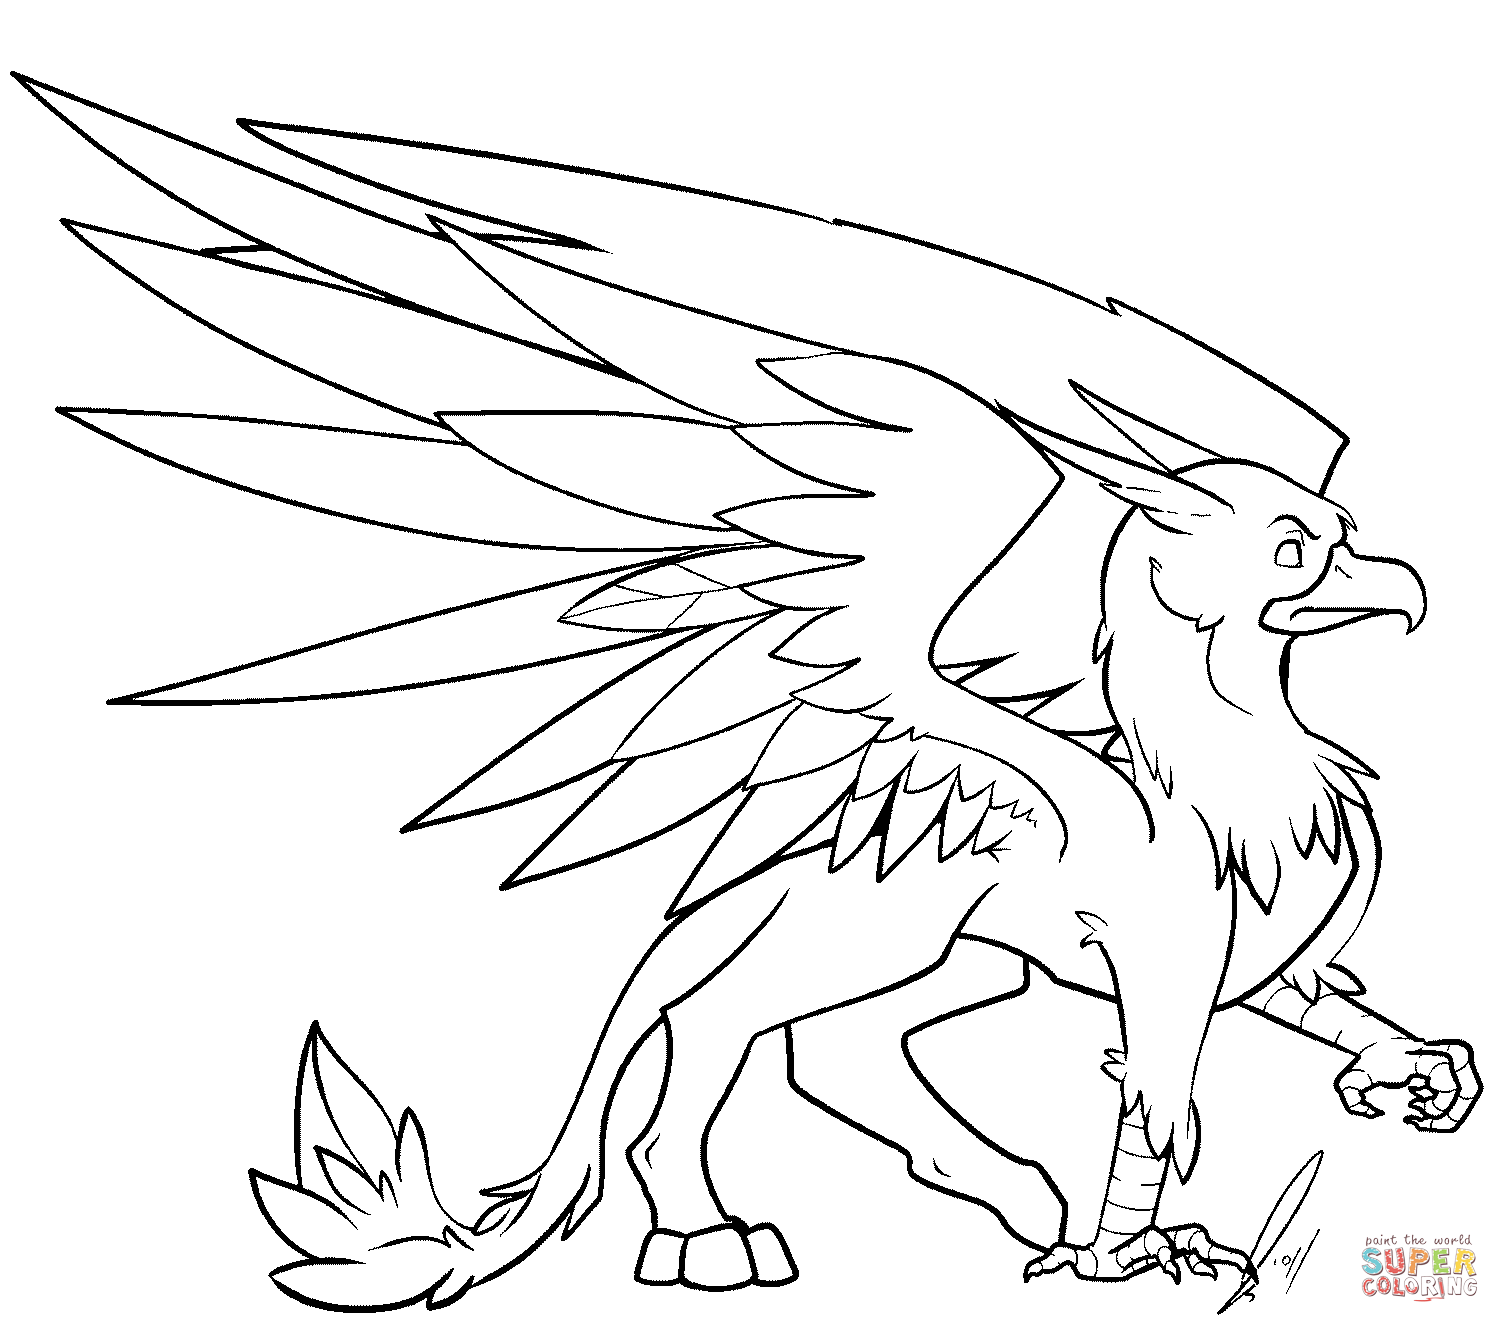 Griffin abstract coloring pages coloring pages animal coloring pages